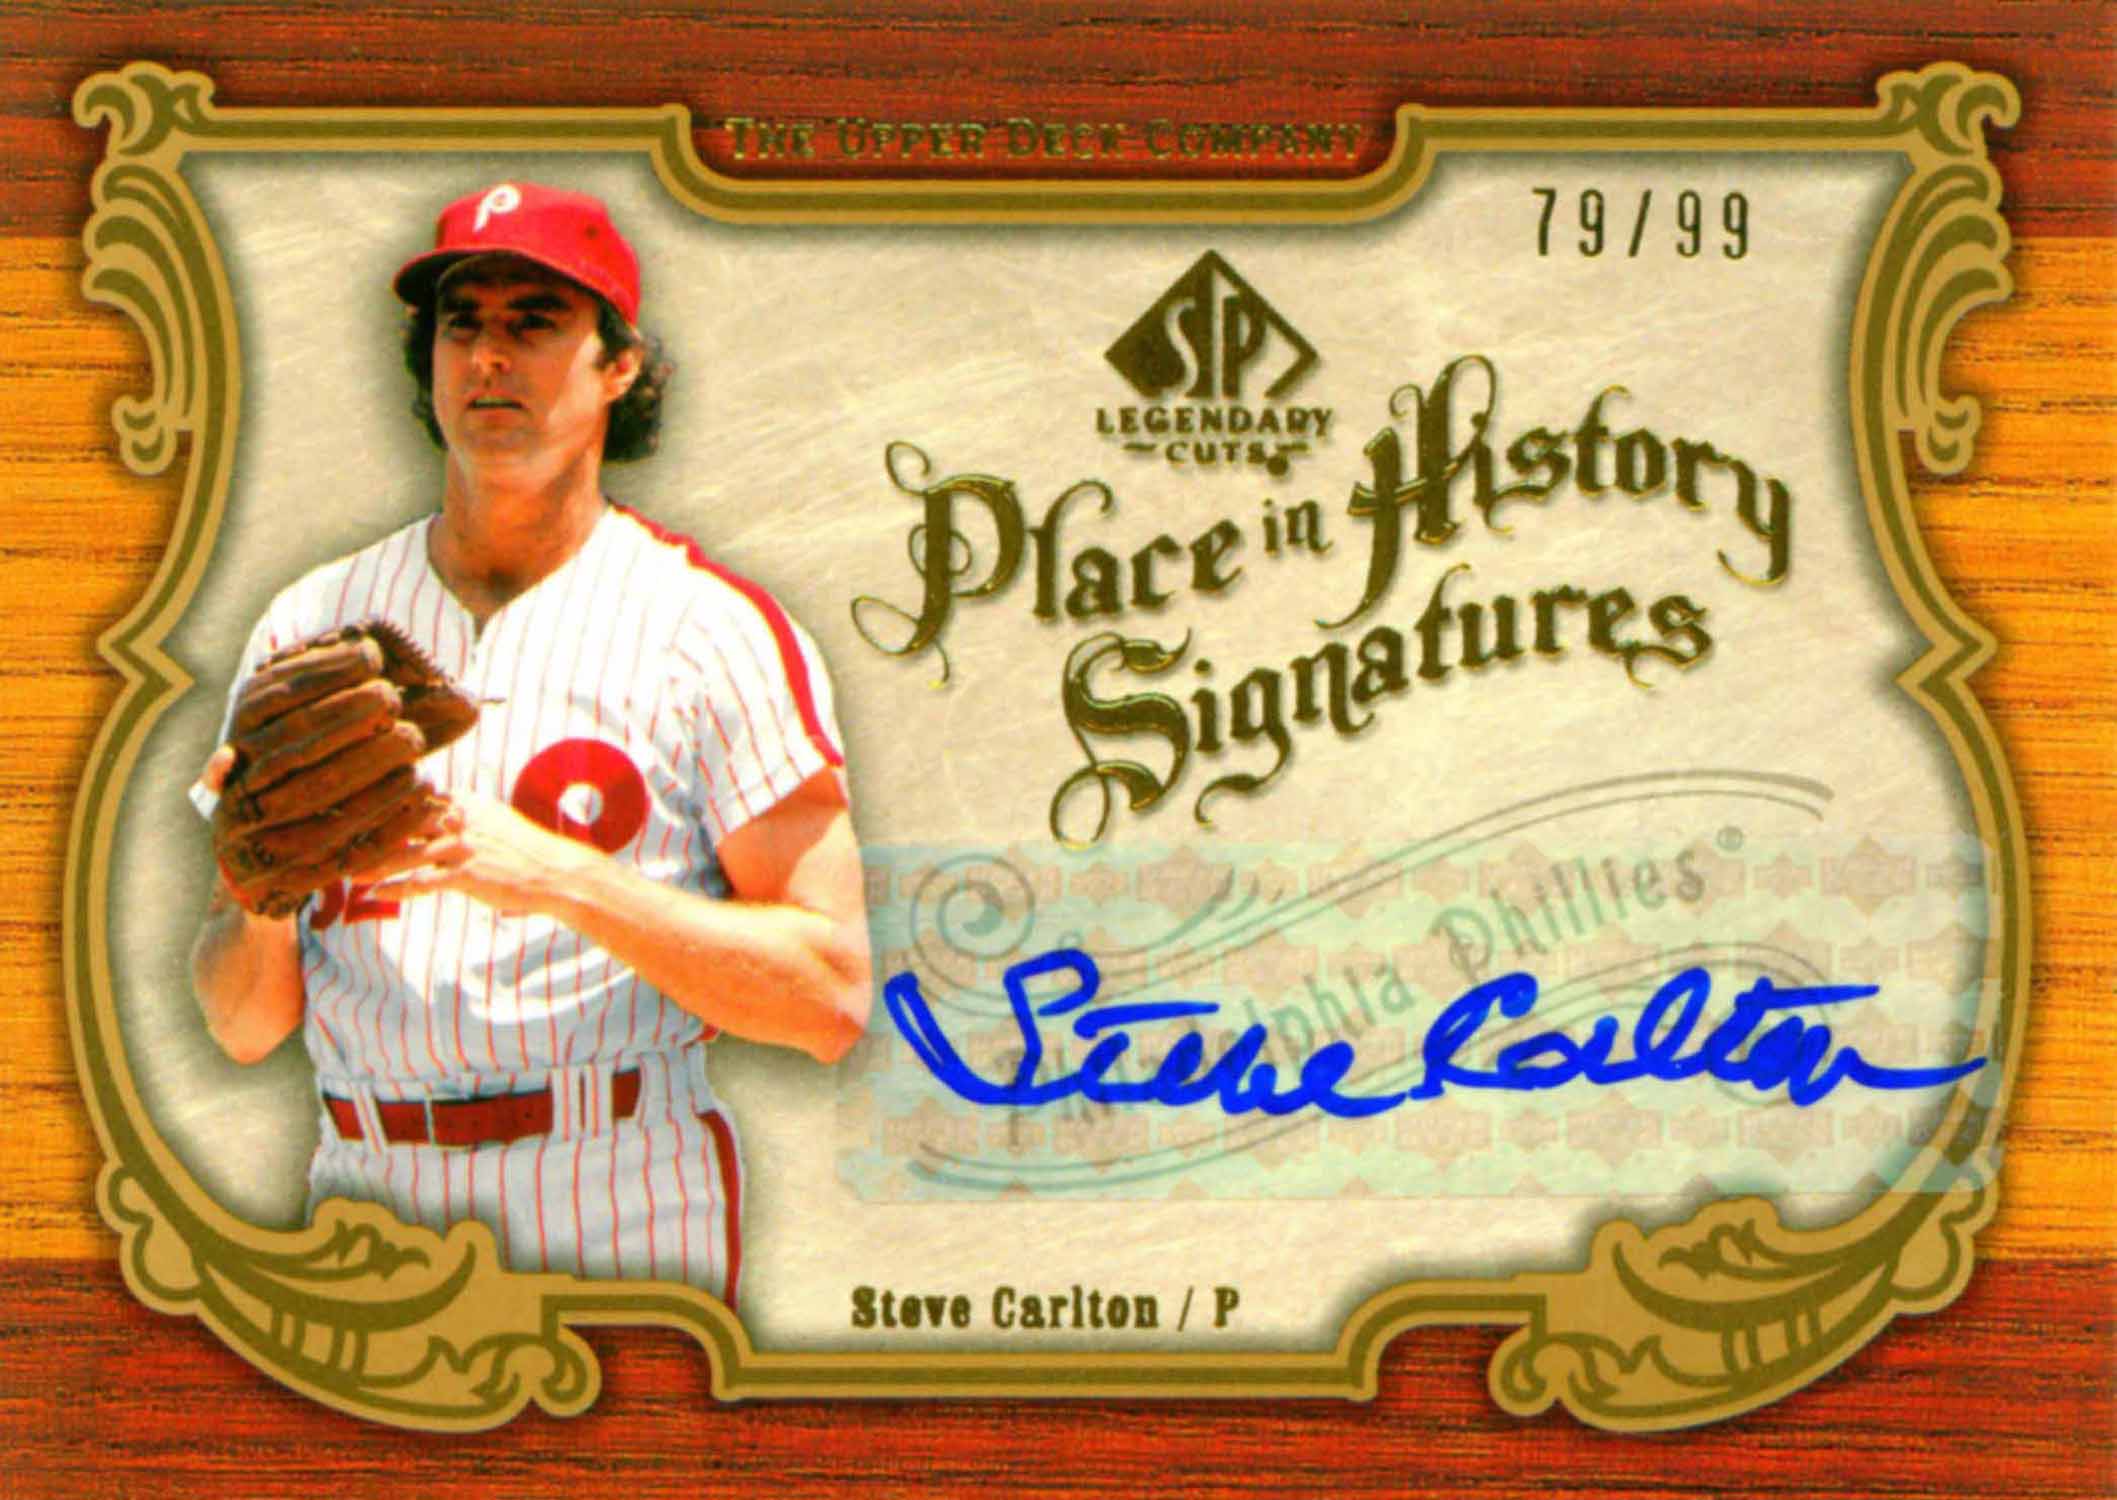 2006 SP Legendary Cuts Place in History Autographs